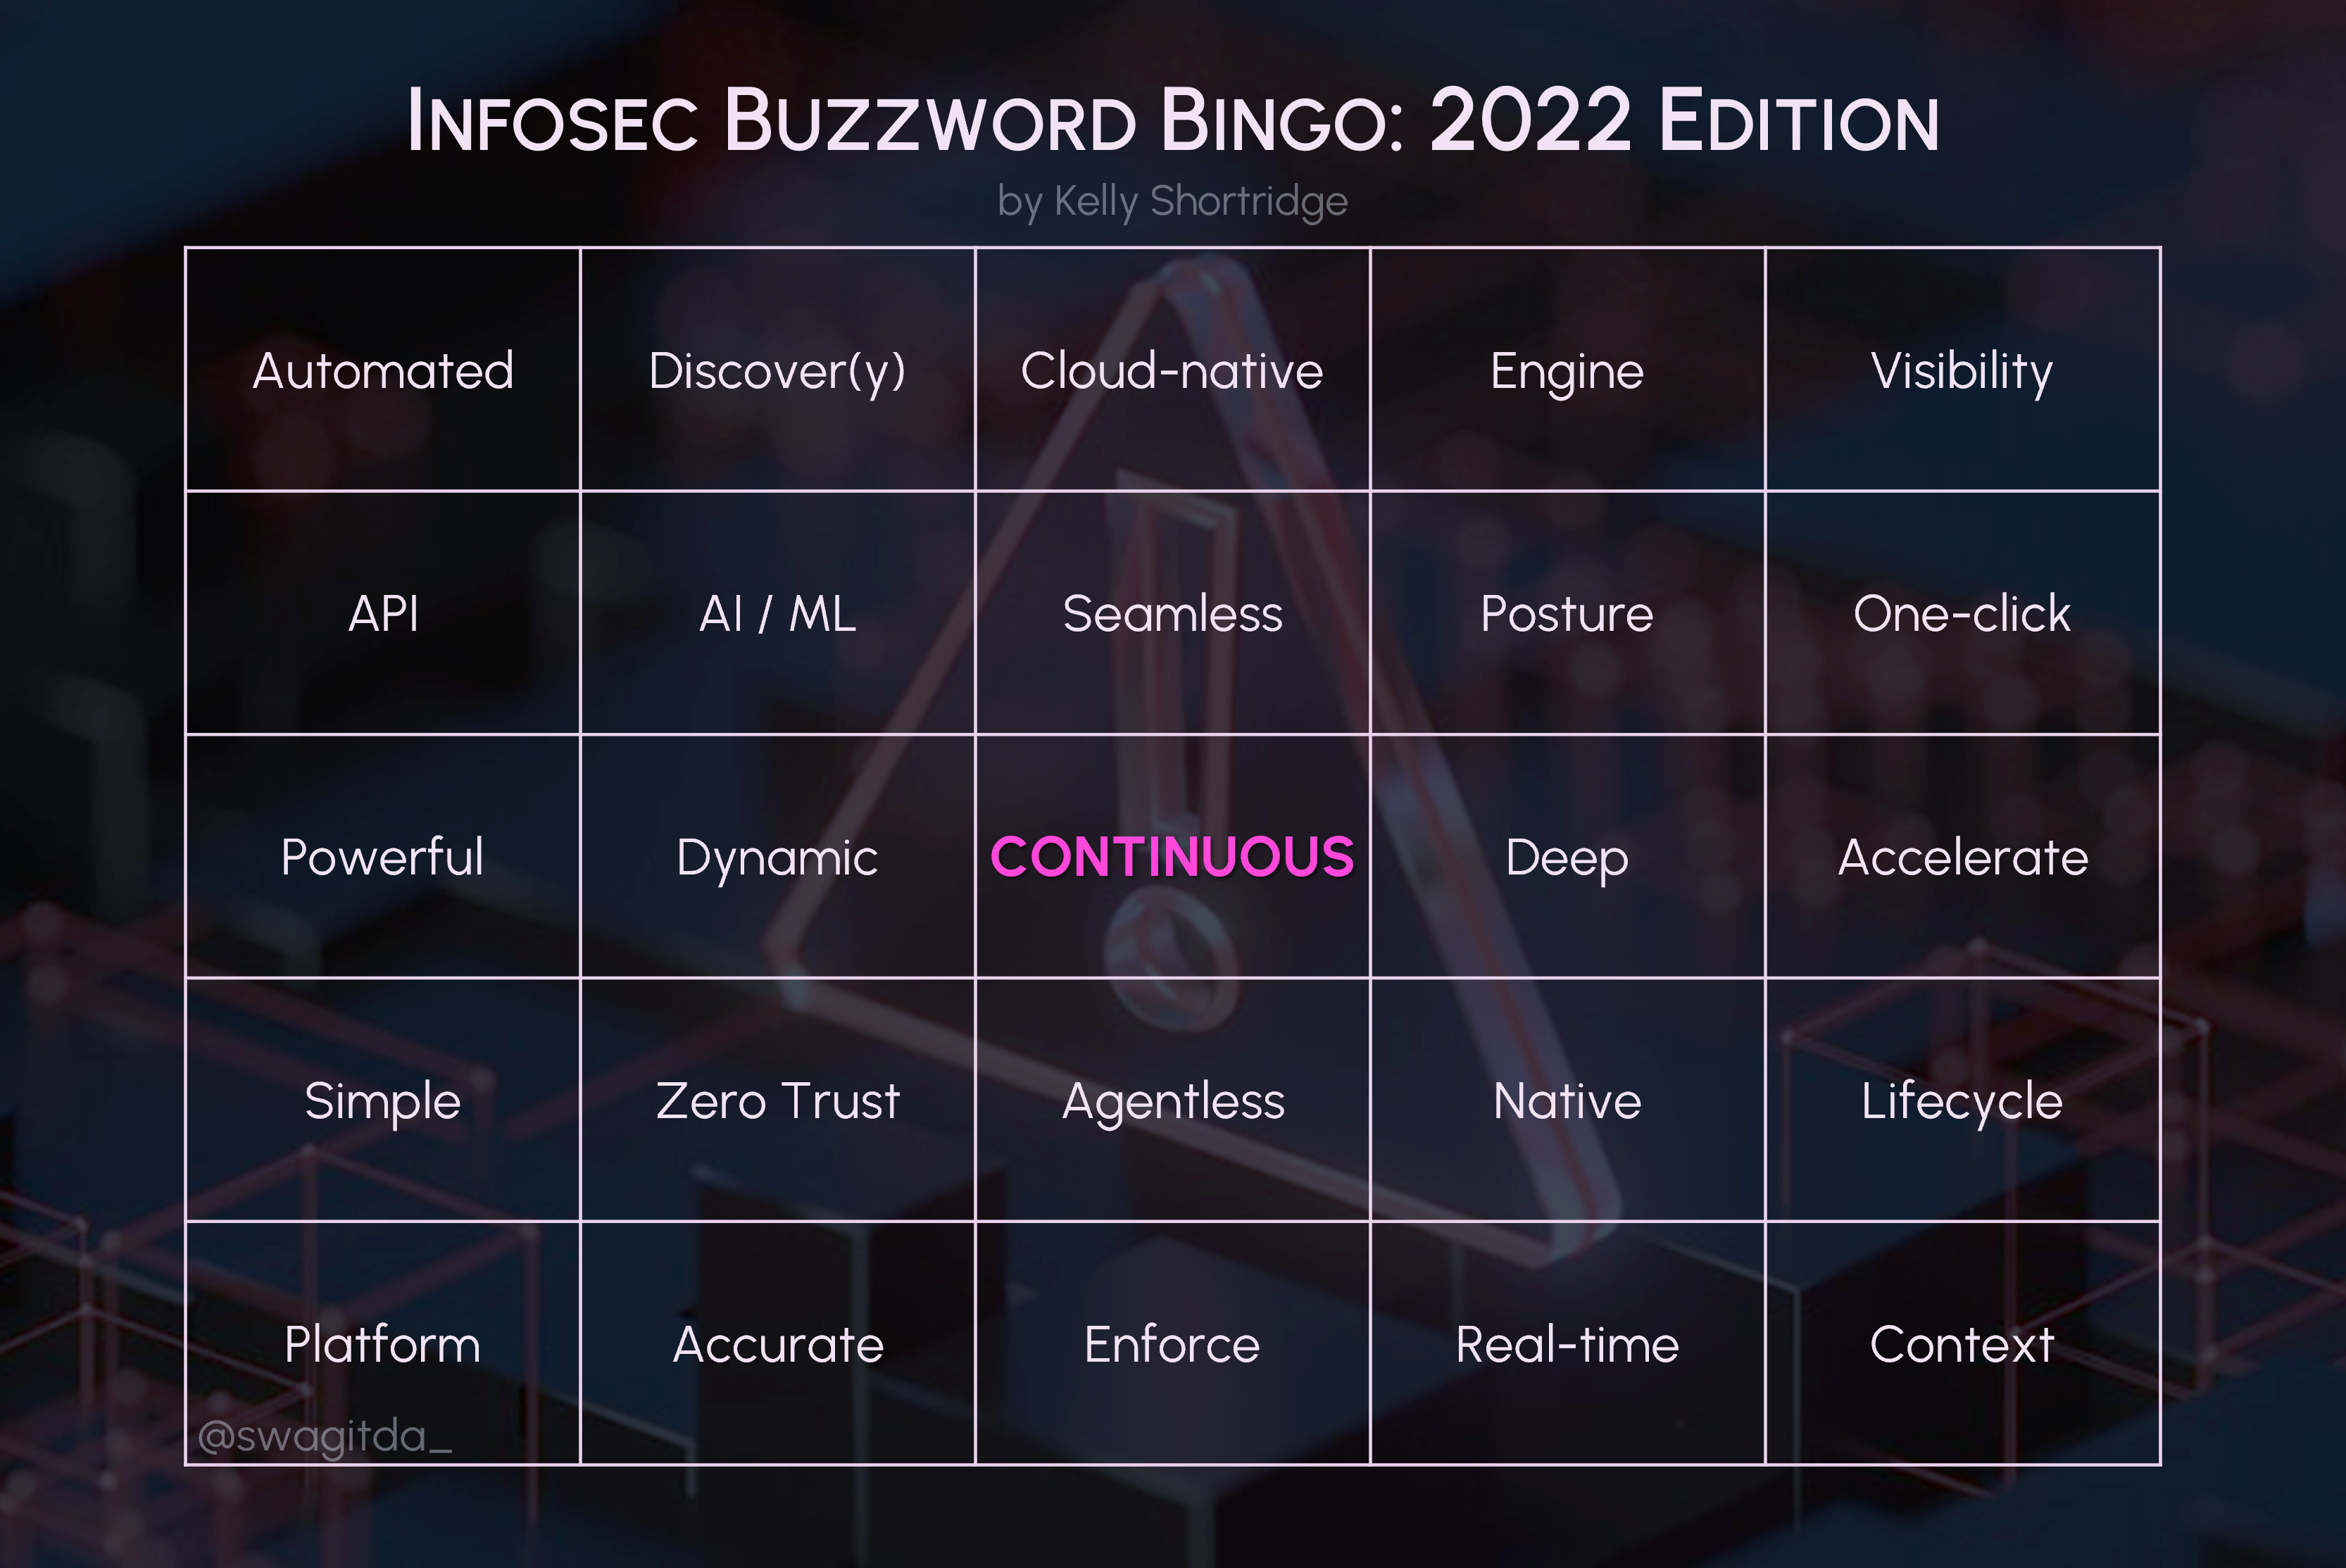 Infosec Startup Buzzword Bingo card for 2022. The background is terrible cyber art that is roughly a translucent caution sign resting above vaporwave colored cubes that are meant to look vaguely like a circuit board. In order from left to right, starting on the upper left side, the buzzwords included on the card are as follows. Automated. Discover. Cloud-native. Engine. Visibility. API. AI / ML. Seamless. Posture. One-click. Powerful. Dynamic. Continuous, which is the center word of the bingo card. Deep. Accelerate. Simple. Zero Trust. Agentless. Native. Lifecycle. Platform. Accurate. Enforce. Real-time. Context.